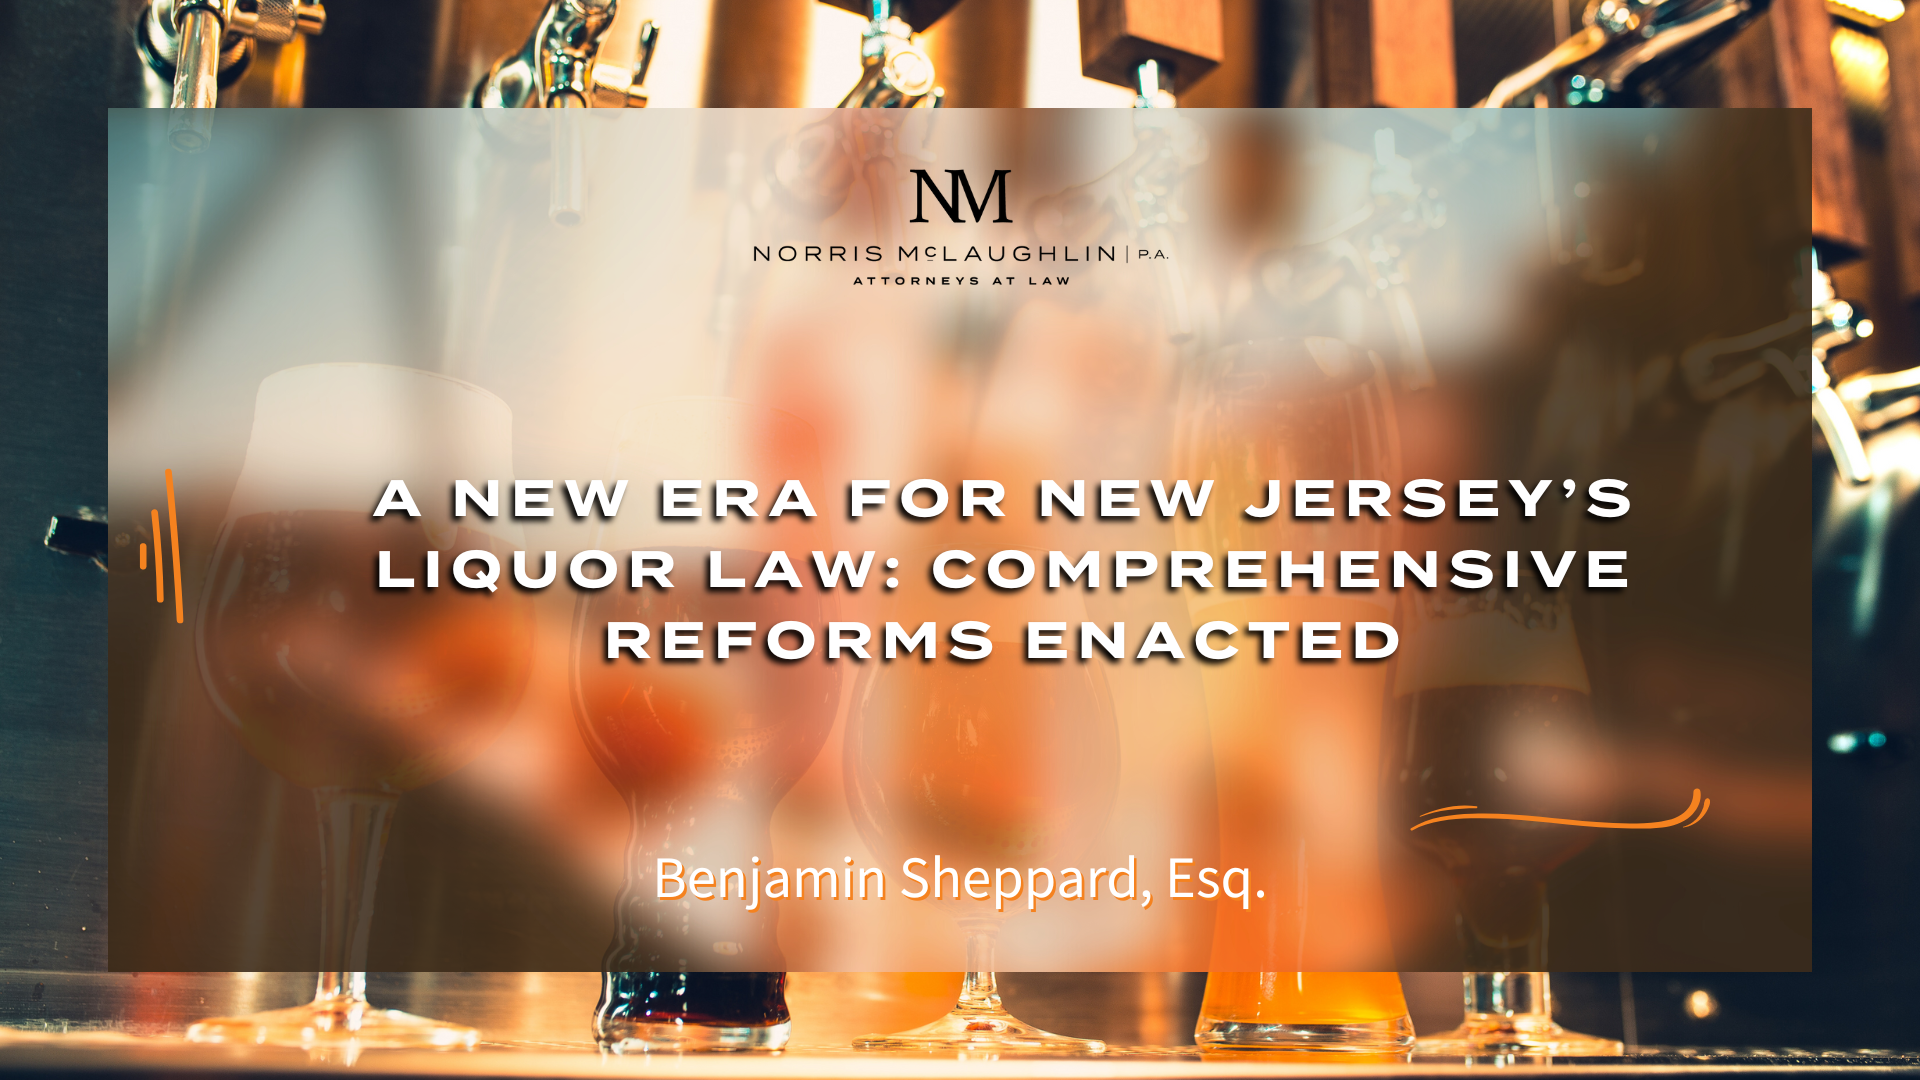 A New Era For New Jersey’s Liquor Law: Comprehensive Reforms Enacted